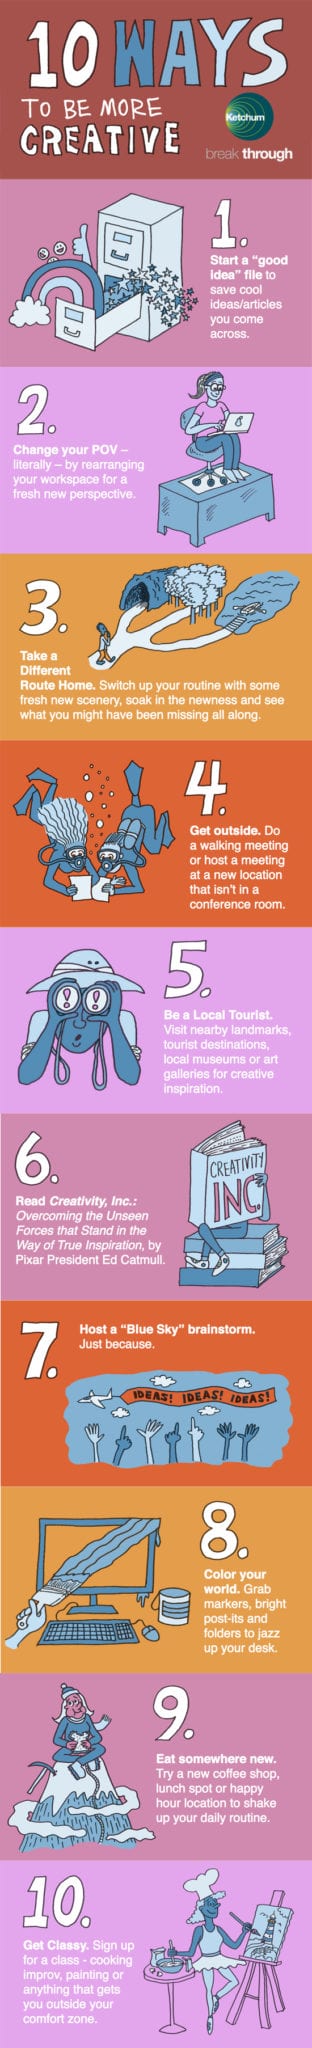 10-Ways-to-Be-More-Creative-vertical